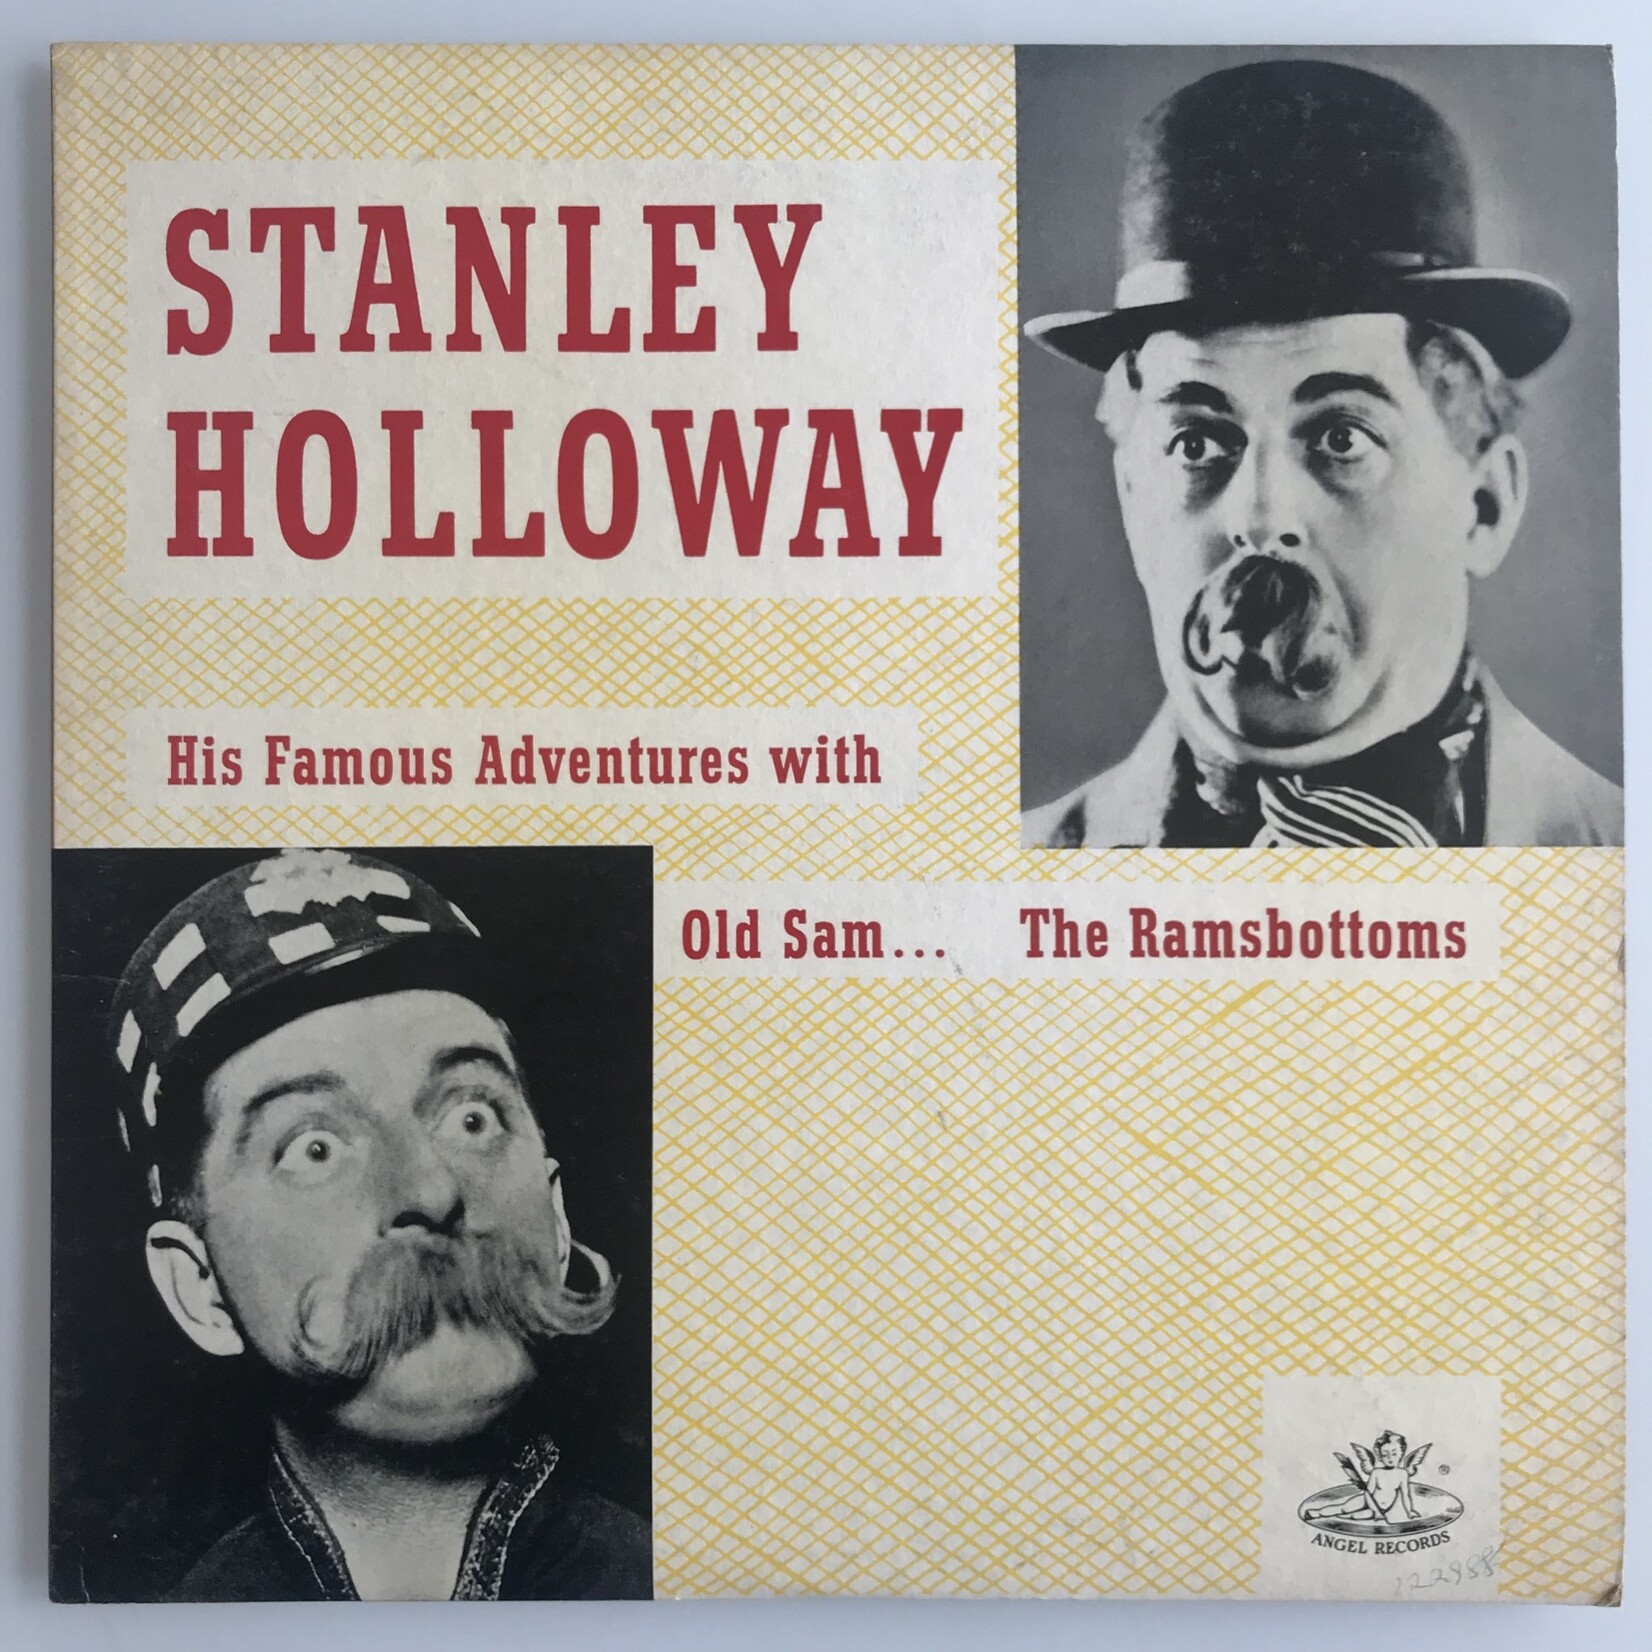 Stanley Holloway - His Famous Adventures With Old Sam And The Ramsbottom - Vinyl LP (USED)